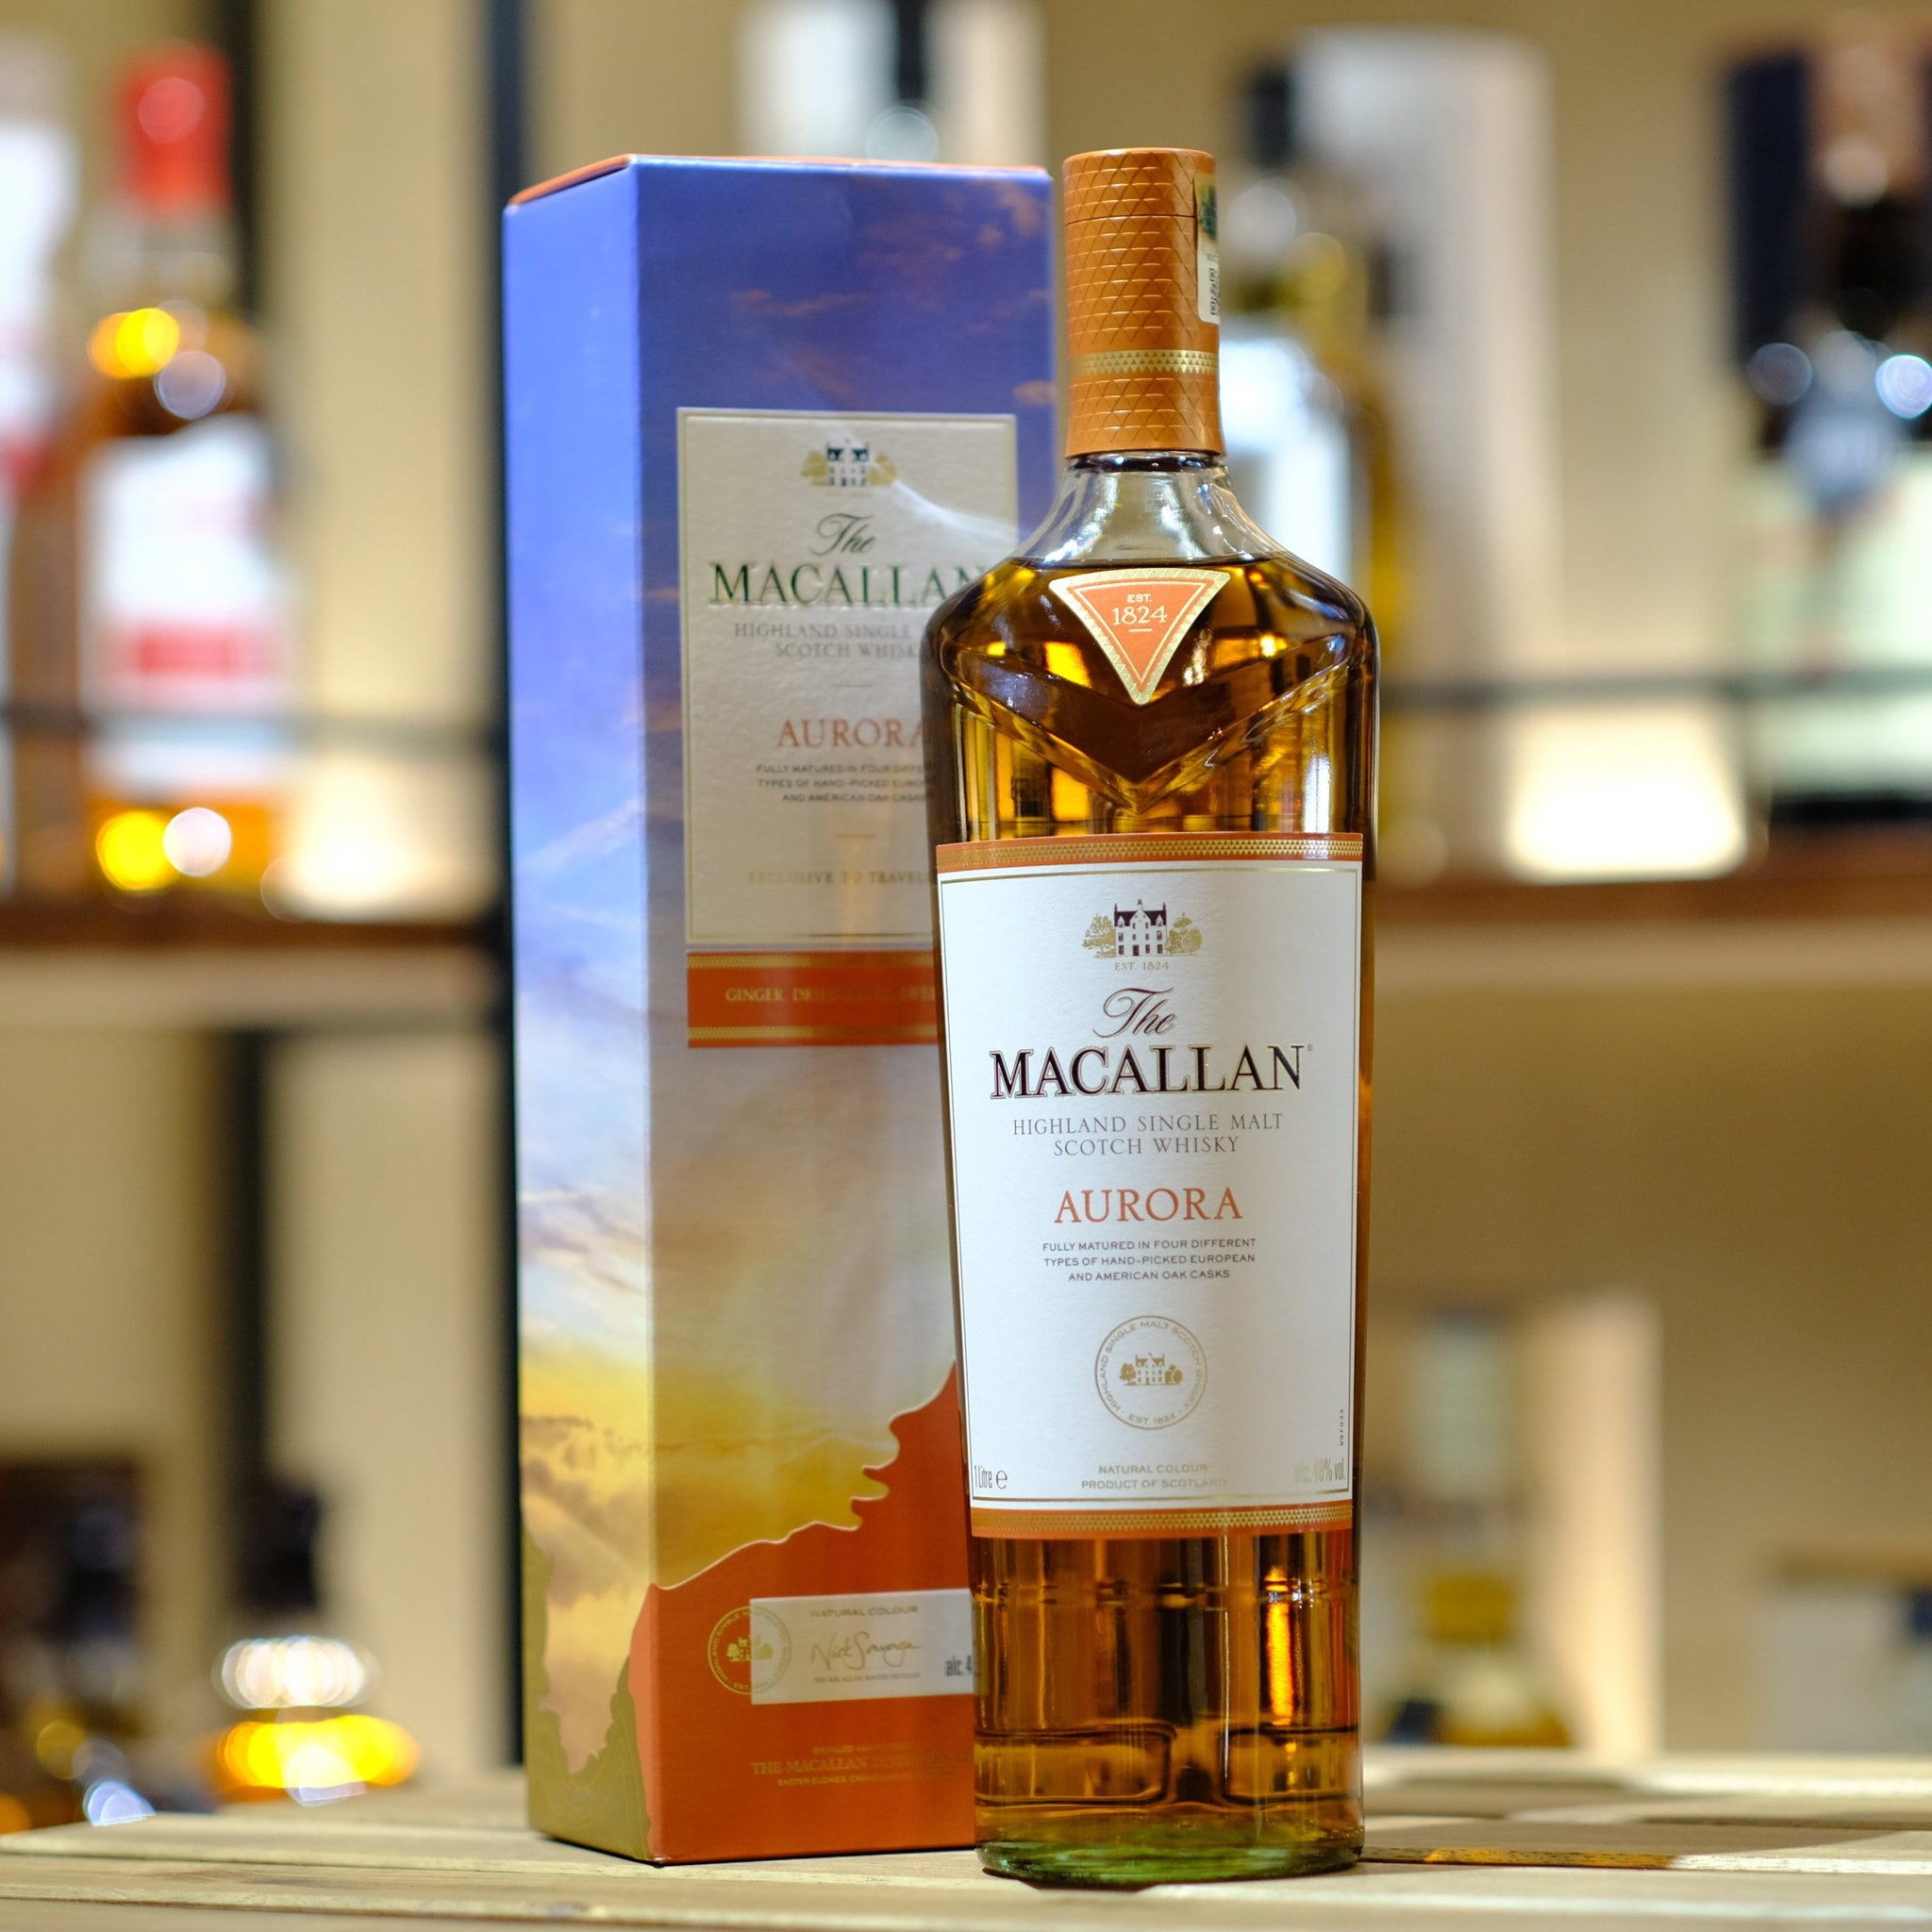 This Macallan Aurora is newest edition of the Quest series in the Travel Retail Market, and exclusive in Taiwan. Matured in Sherry seasoned European oak  and American Oak. 